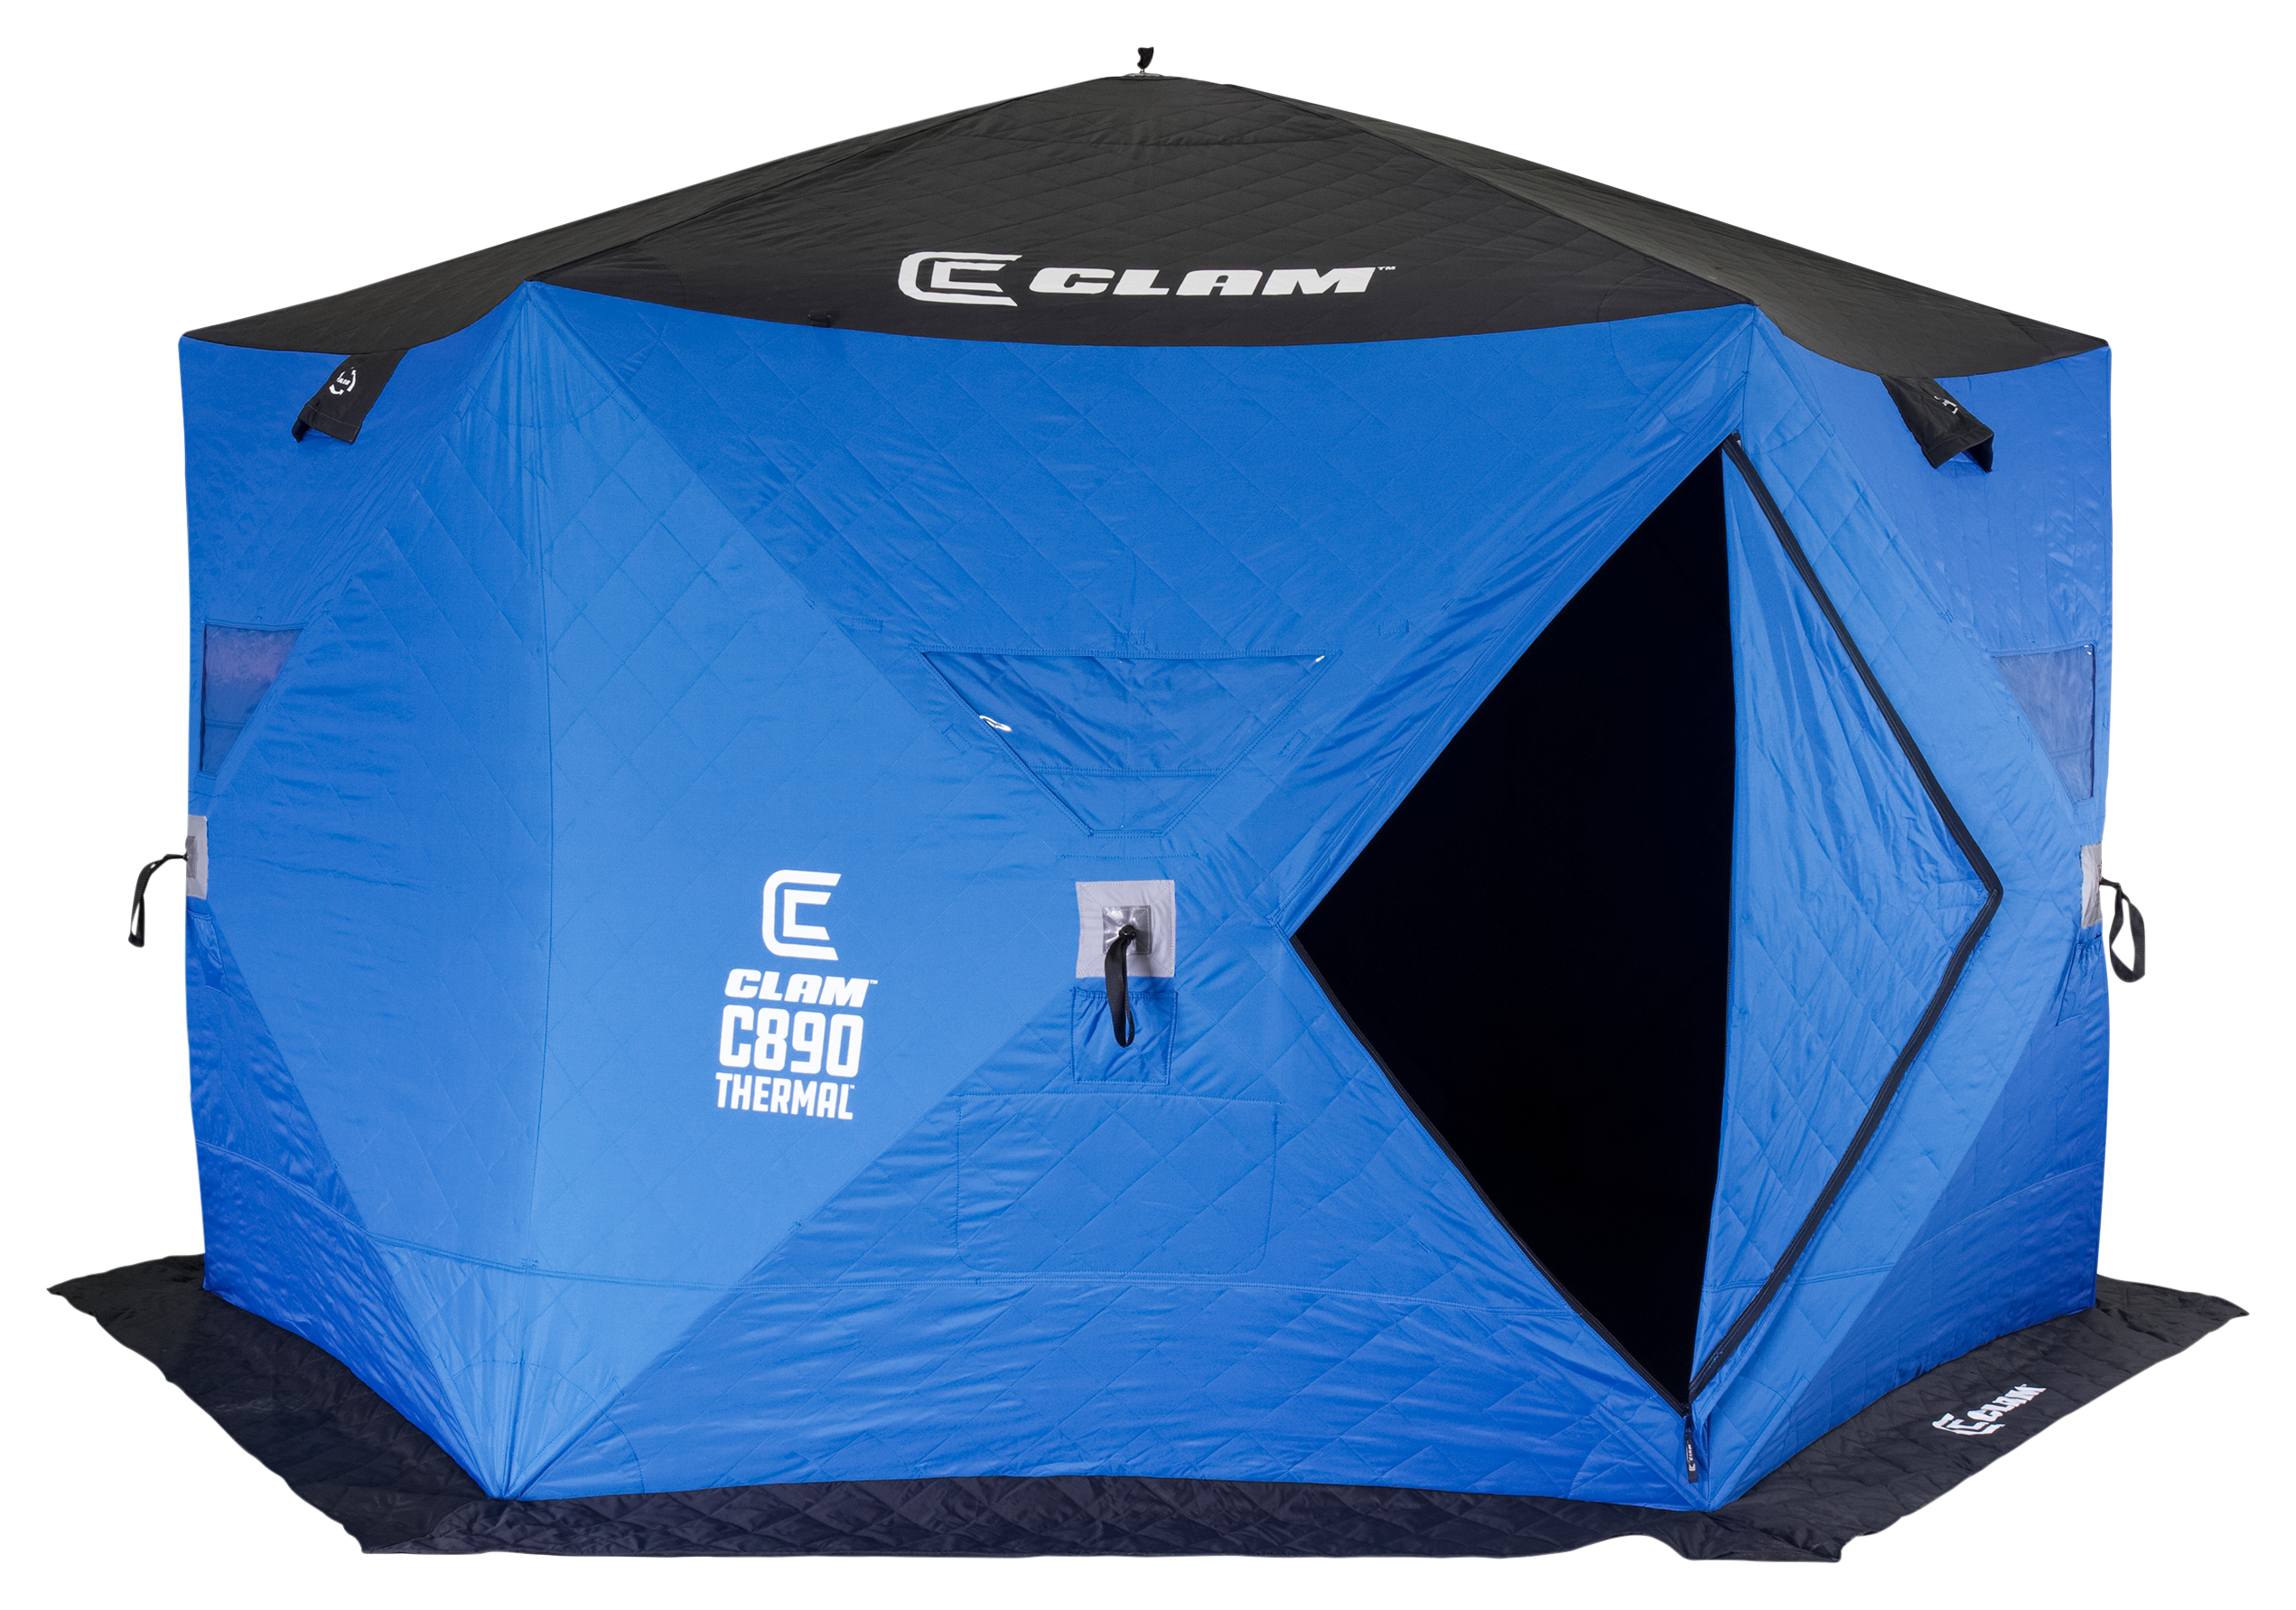 How to choose insulated and non-insulated ice fishing shelter